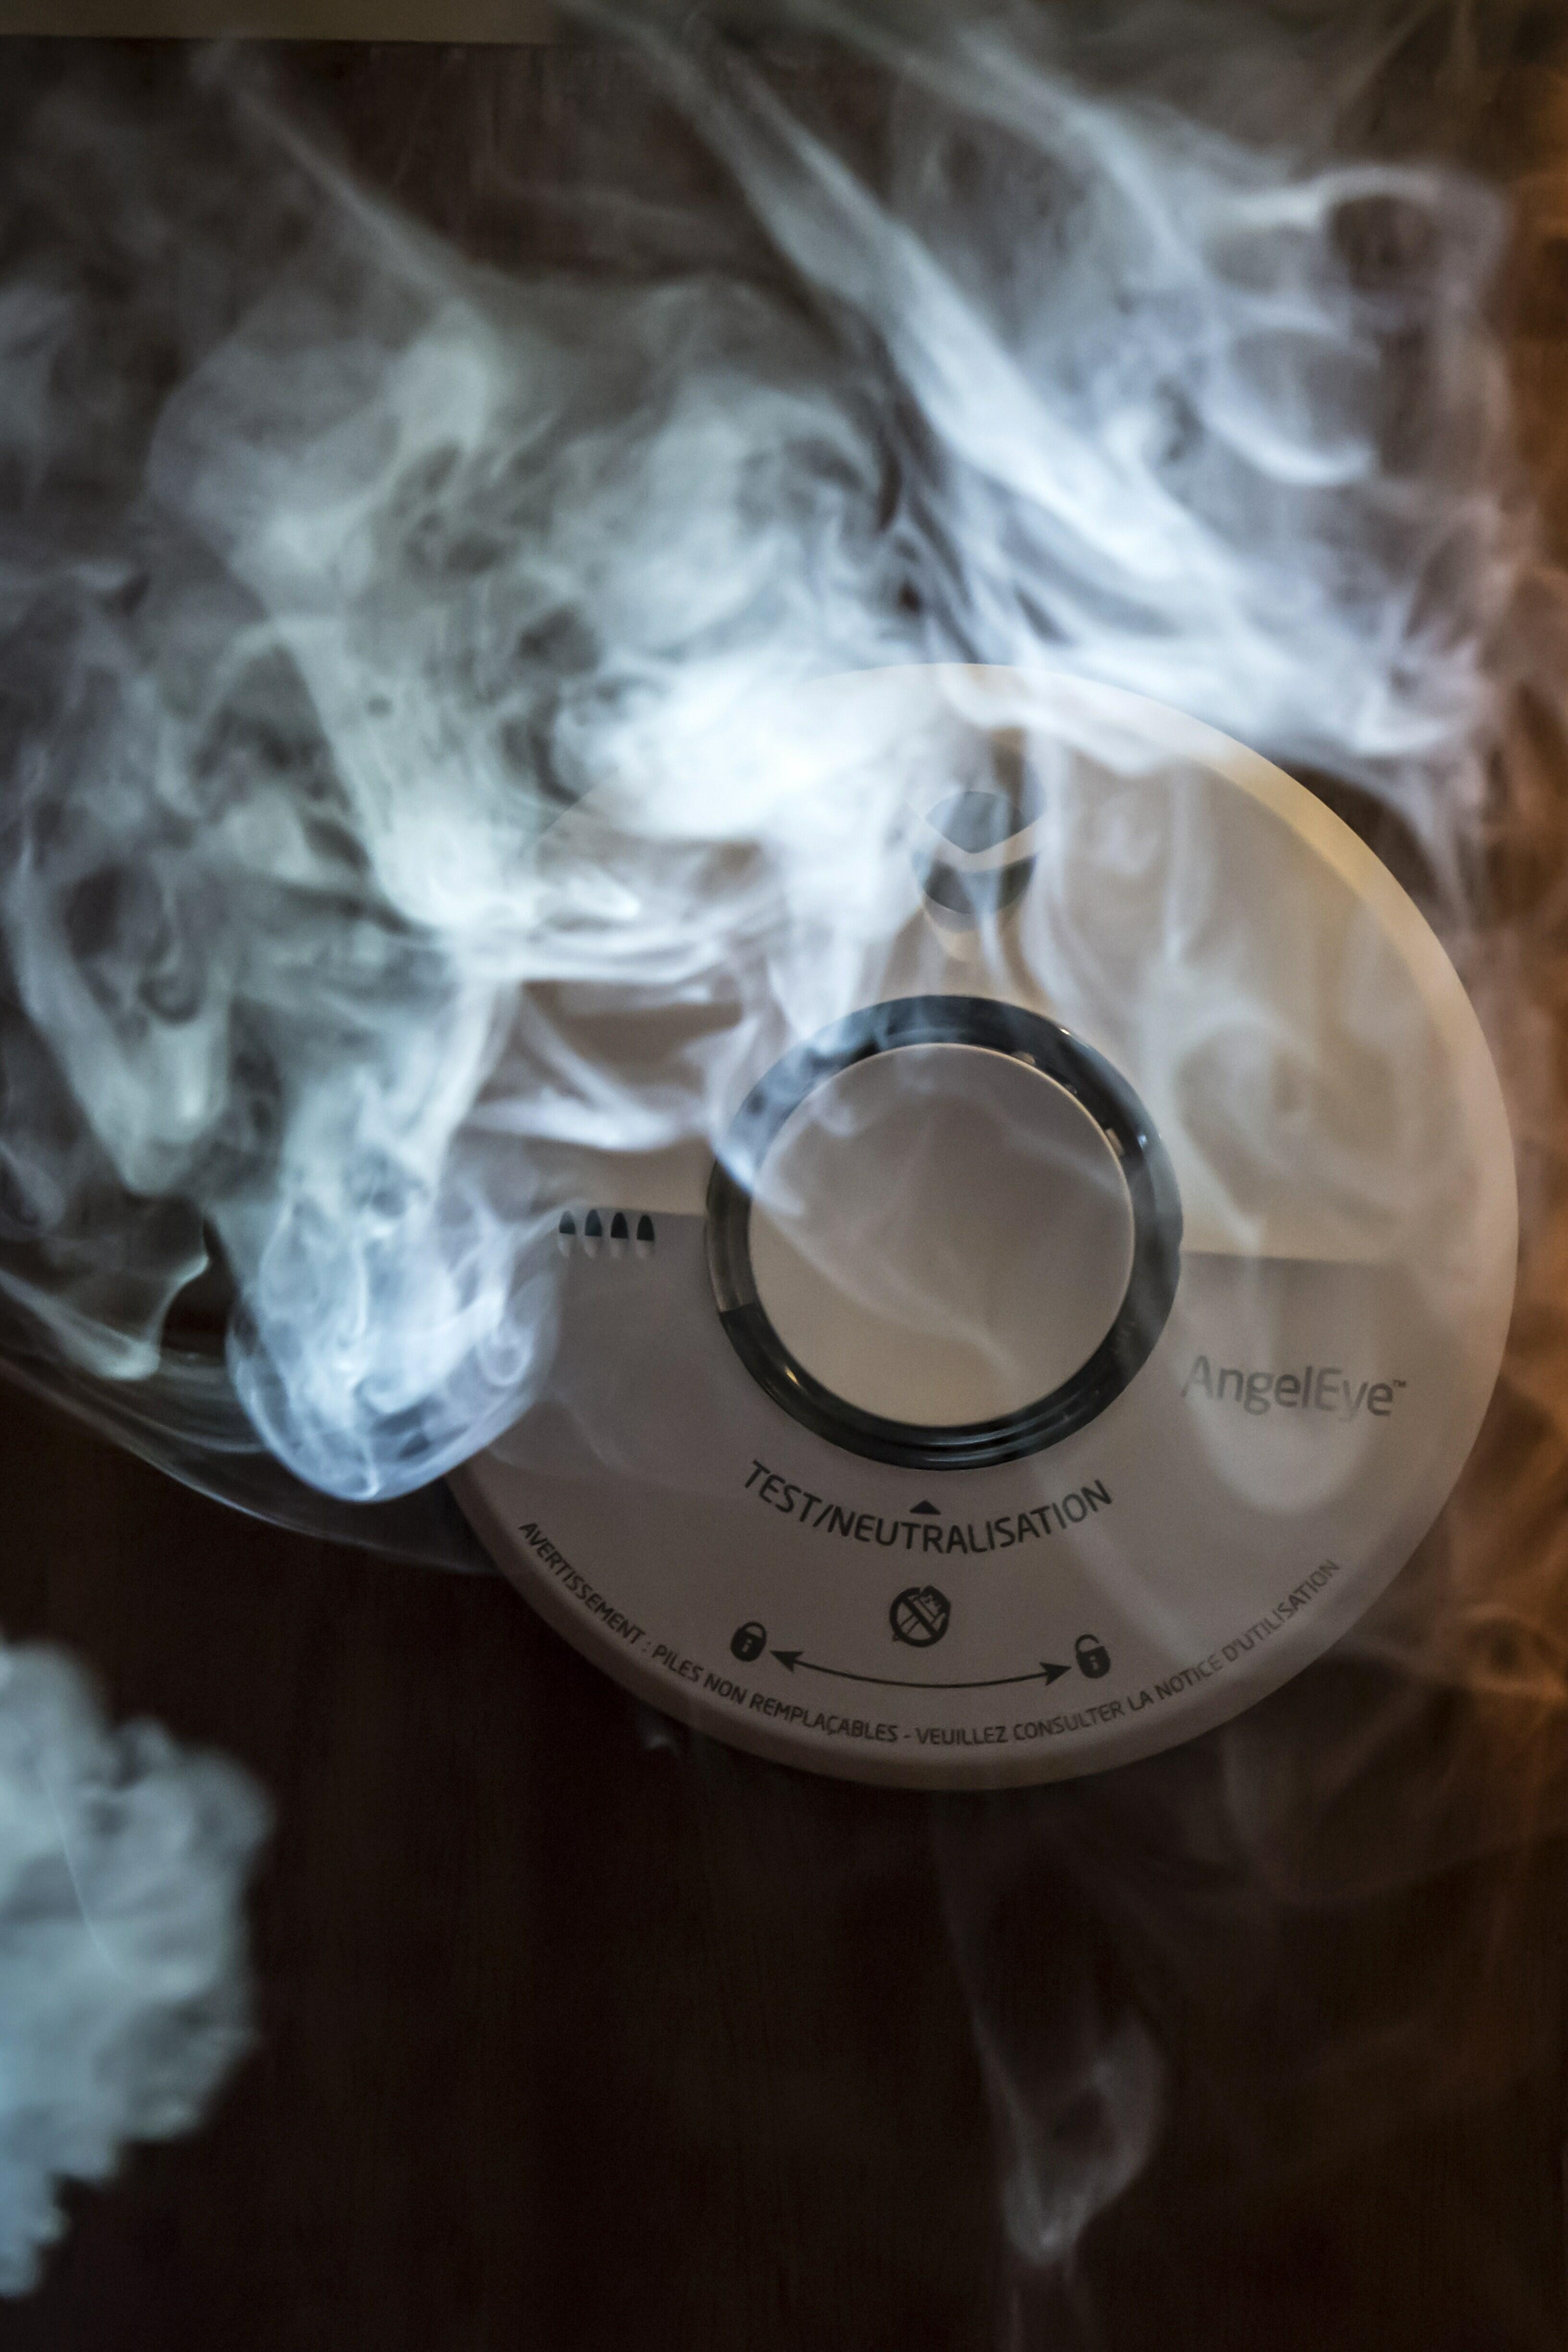 TO GO WITH AFP STORY BY REBECCA FRASQUET A photo taken on February 26, 2015 shows a smoke detector in a home in Lyon. The Federation Francaise des Metiers de l'Incendie (FFMI) estimates in a projection that between 60-65% of homes will not be equipped wit